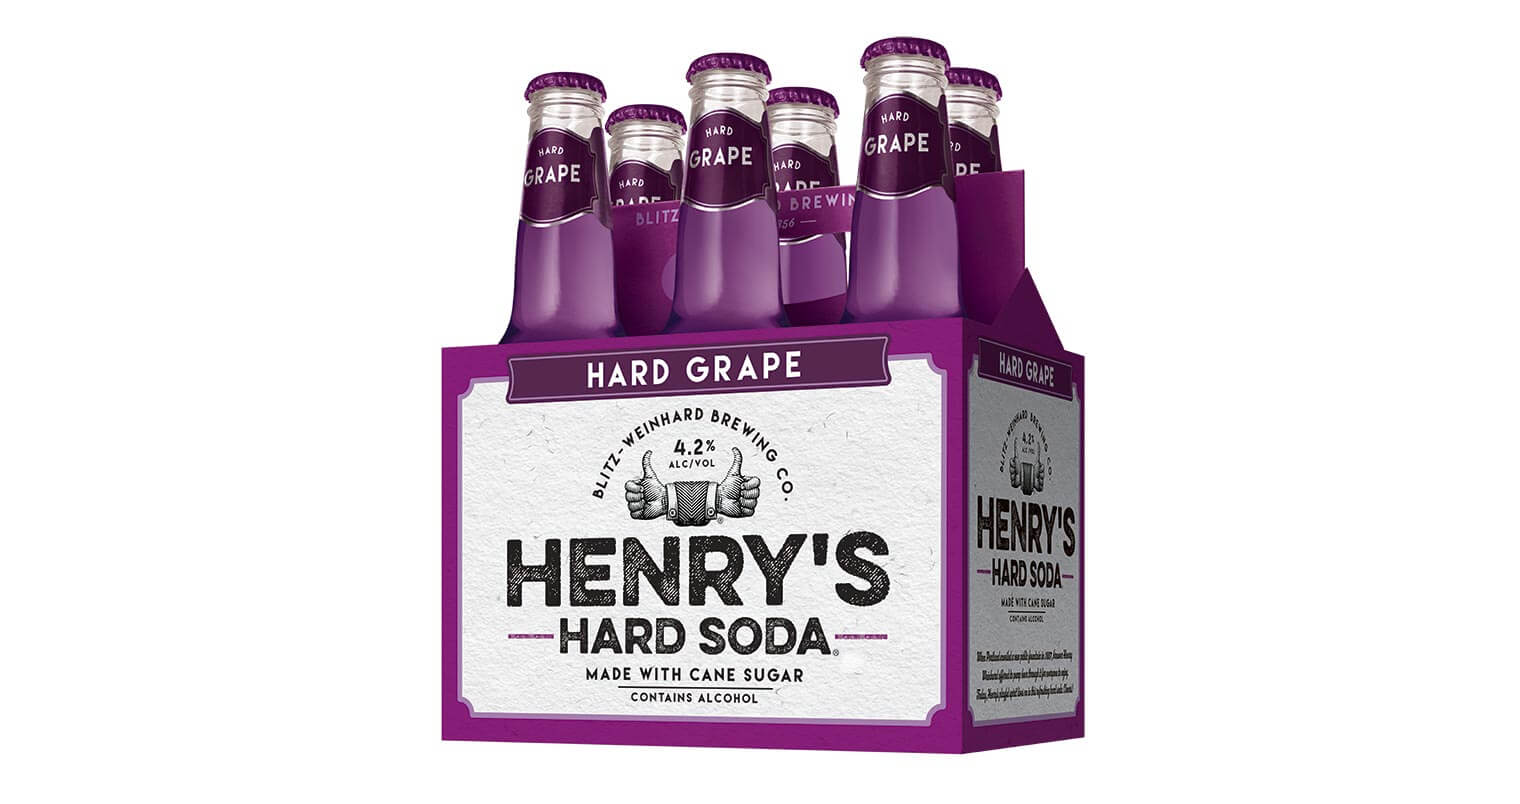 Henry's Hard Soda Launches New Grape Flavor, featured image